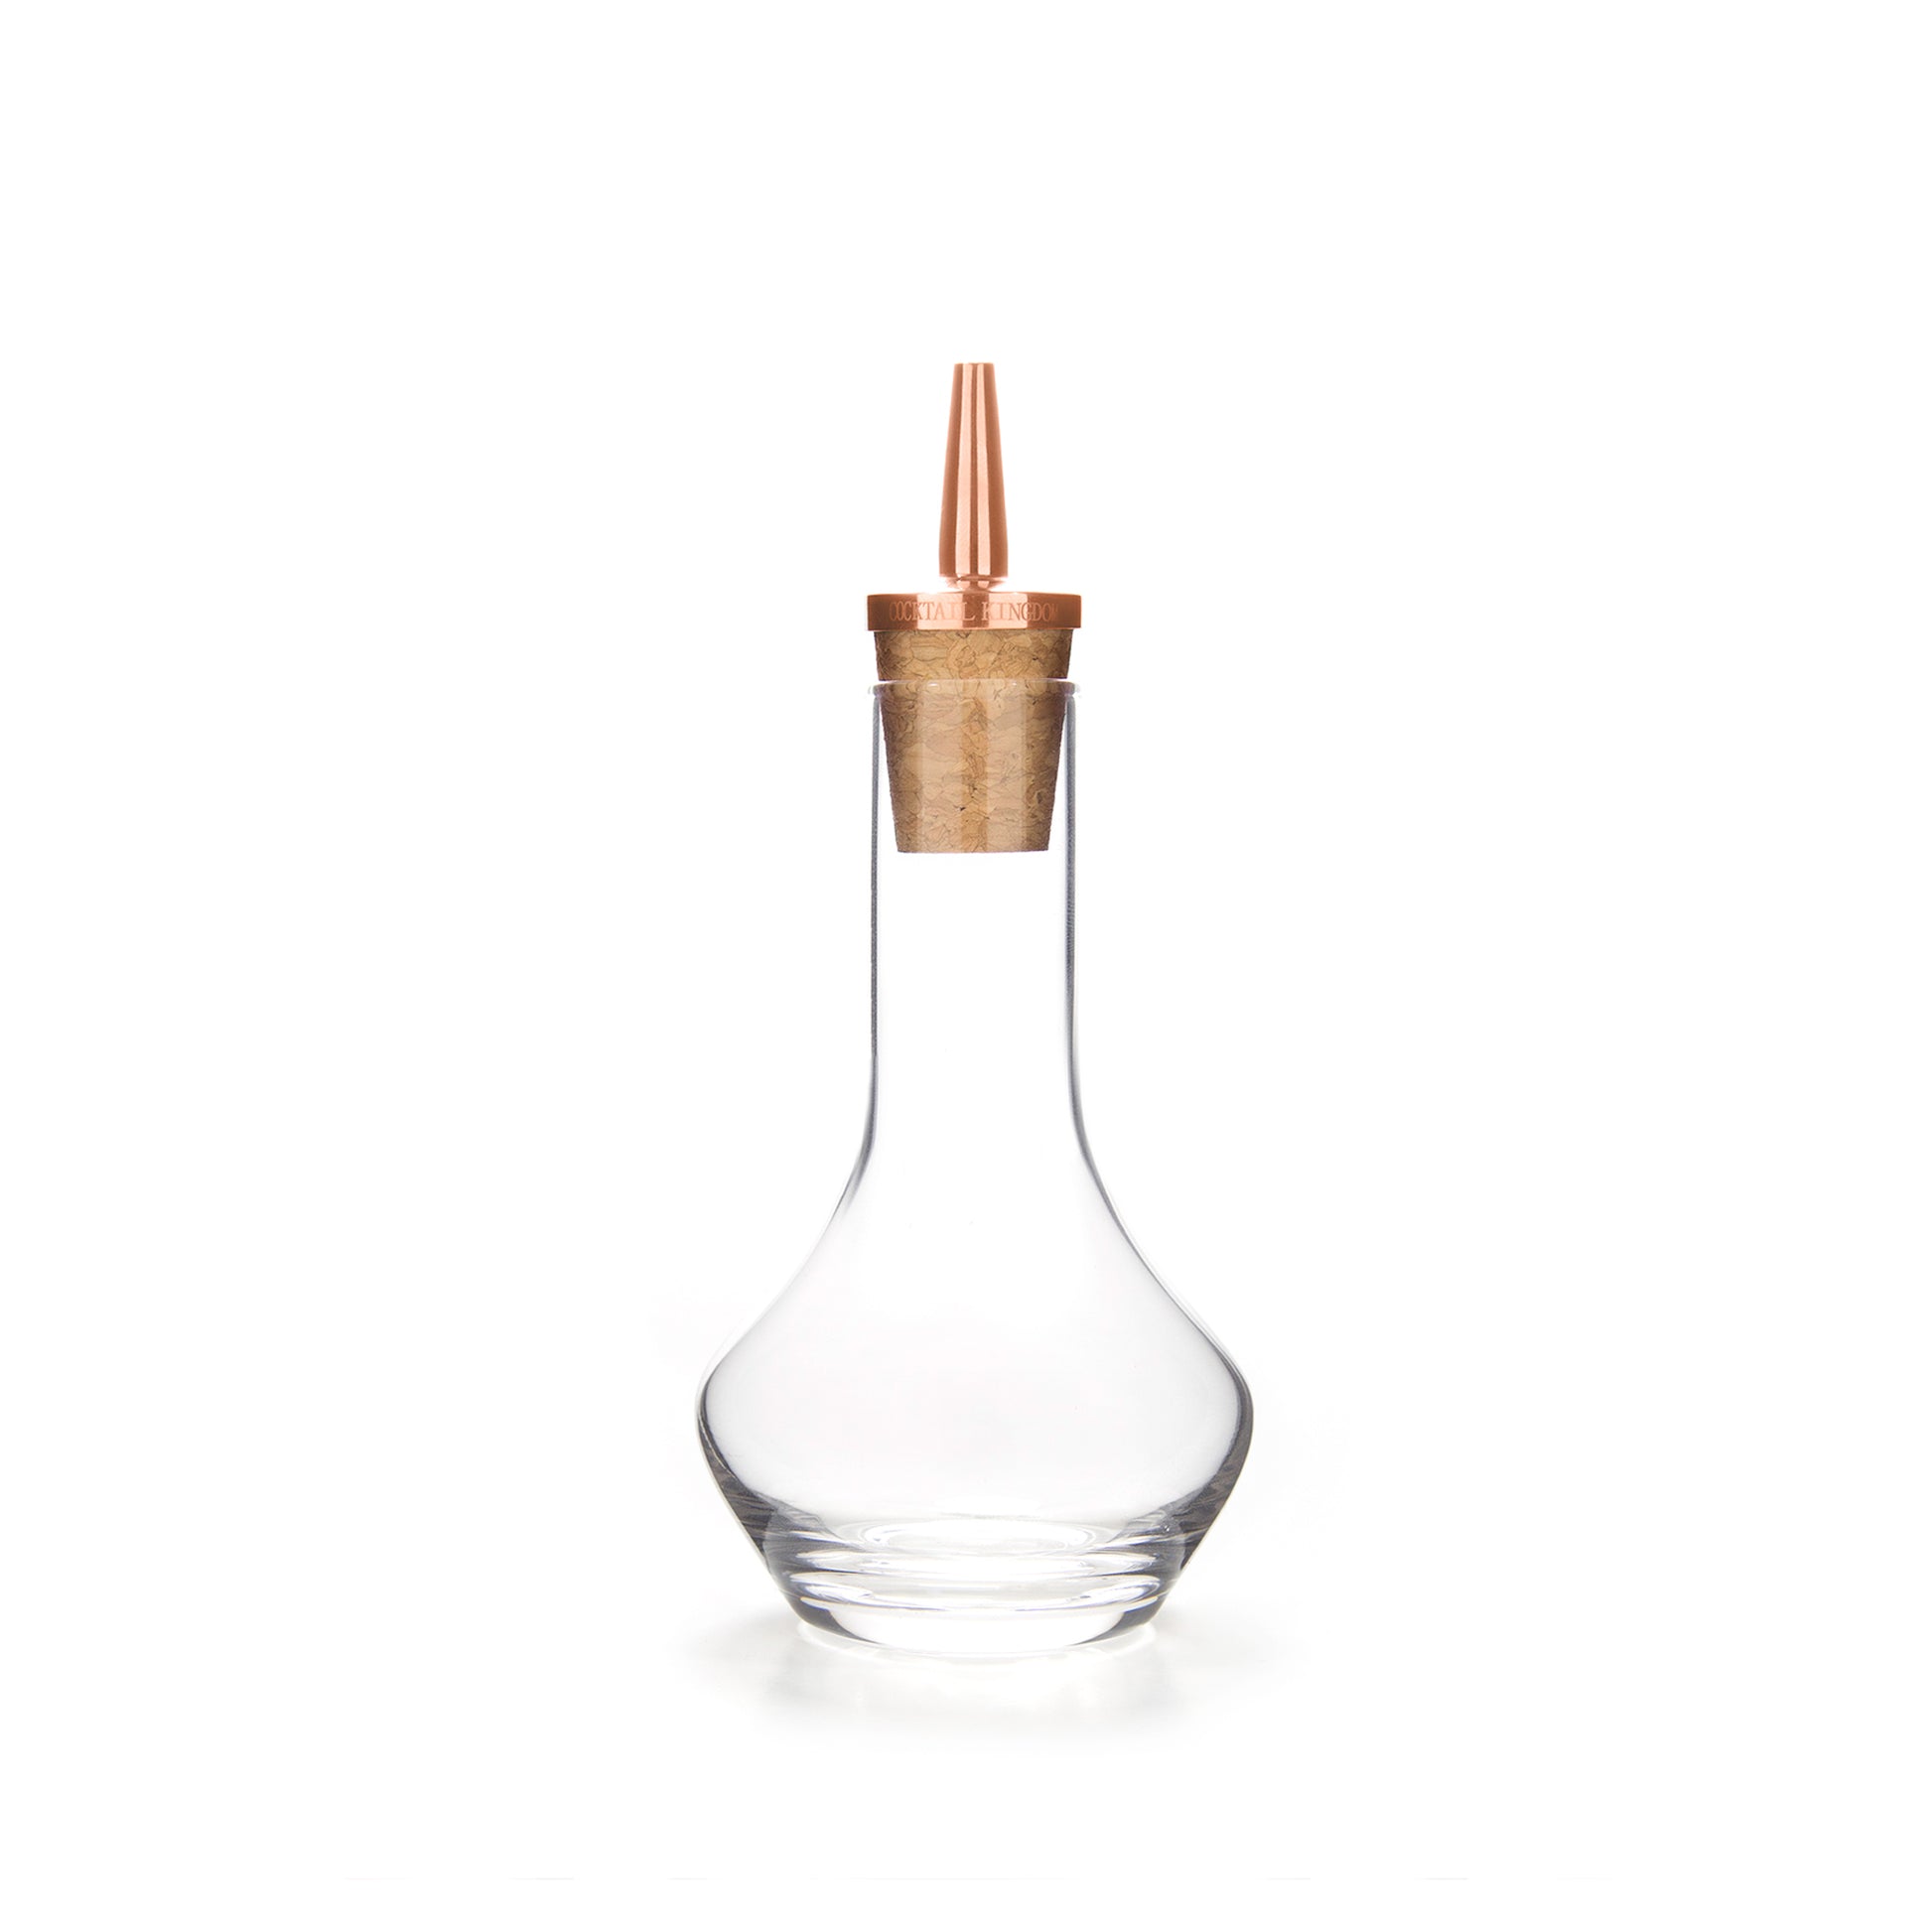 BITTERS BOTTLE – COPPER-PLATED DASHER TOP / 50ml (1.7oz)